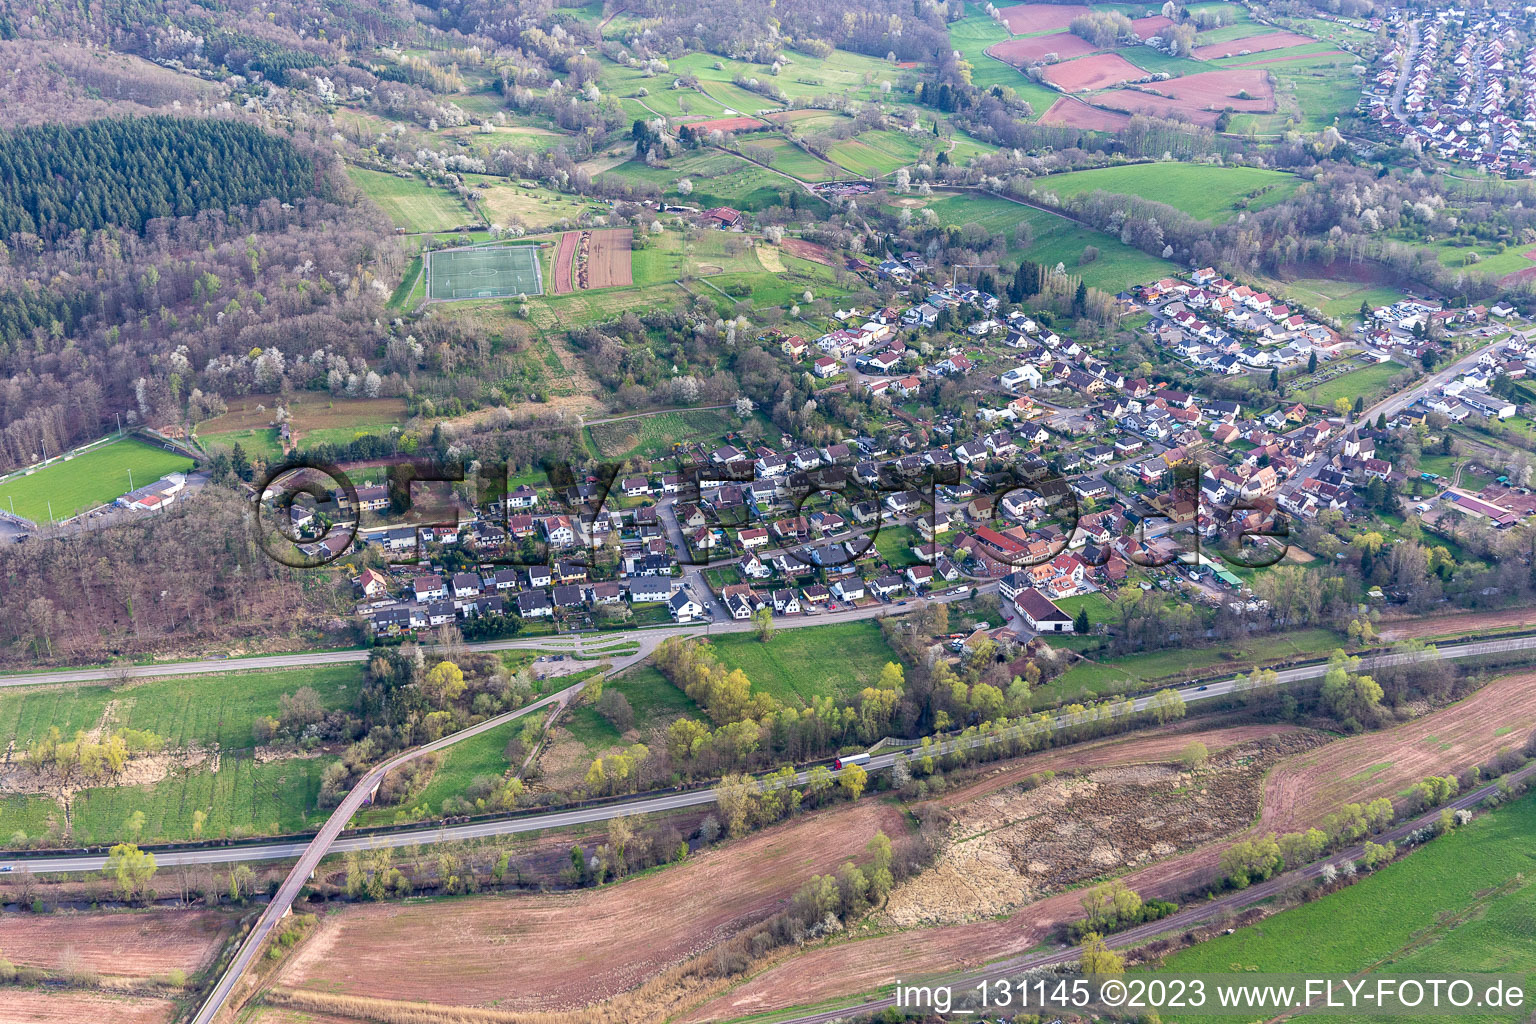 District Queichhambach in Annweiler am Trifels in the state Rhineland-Palatinate, Germany from above